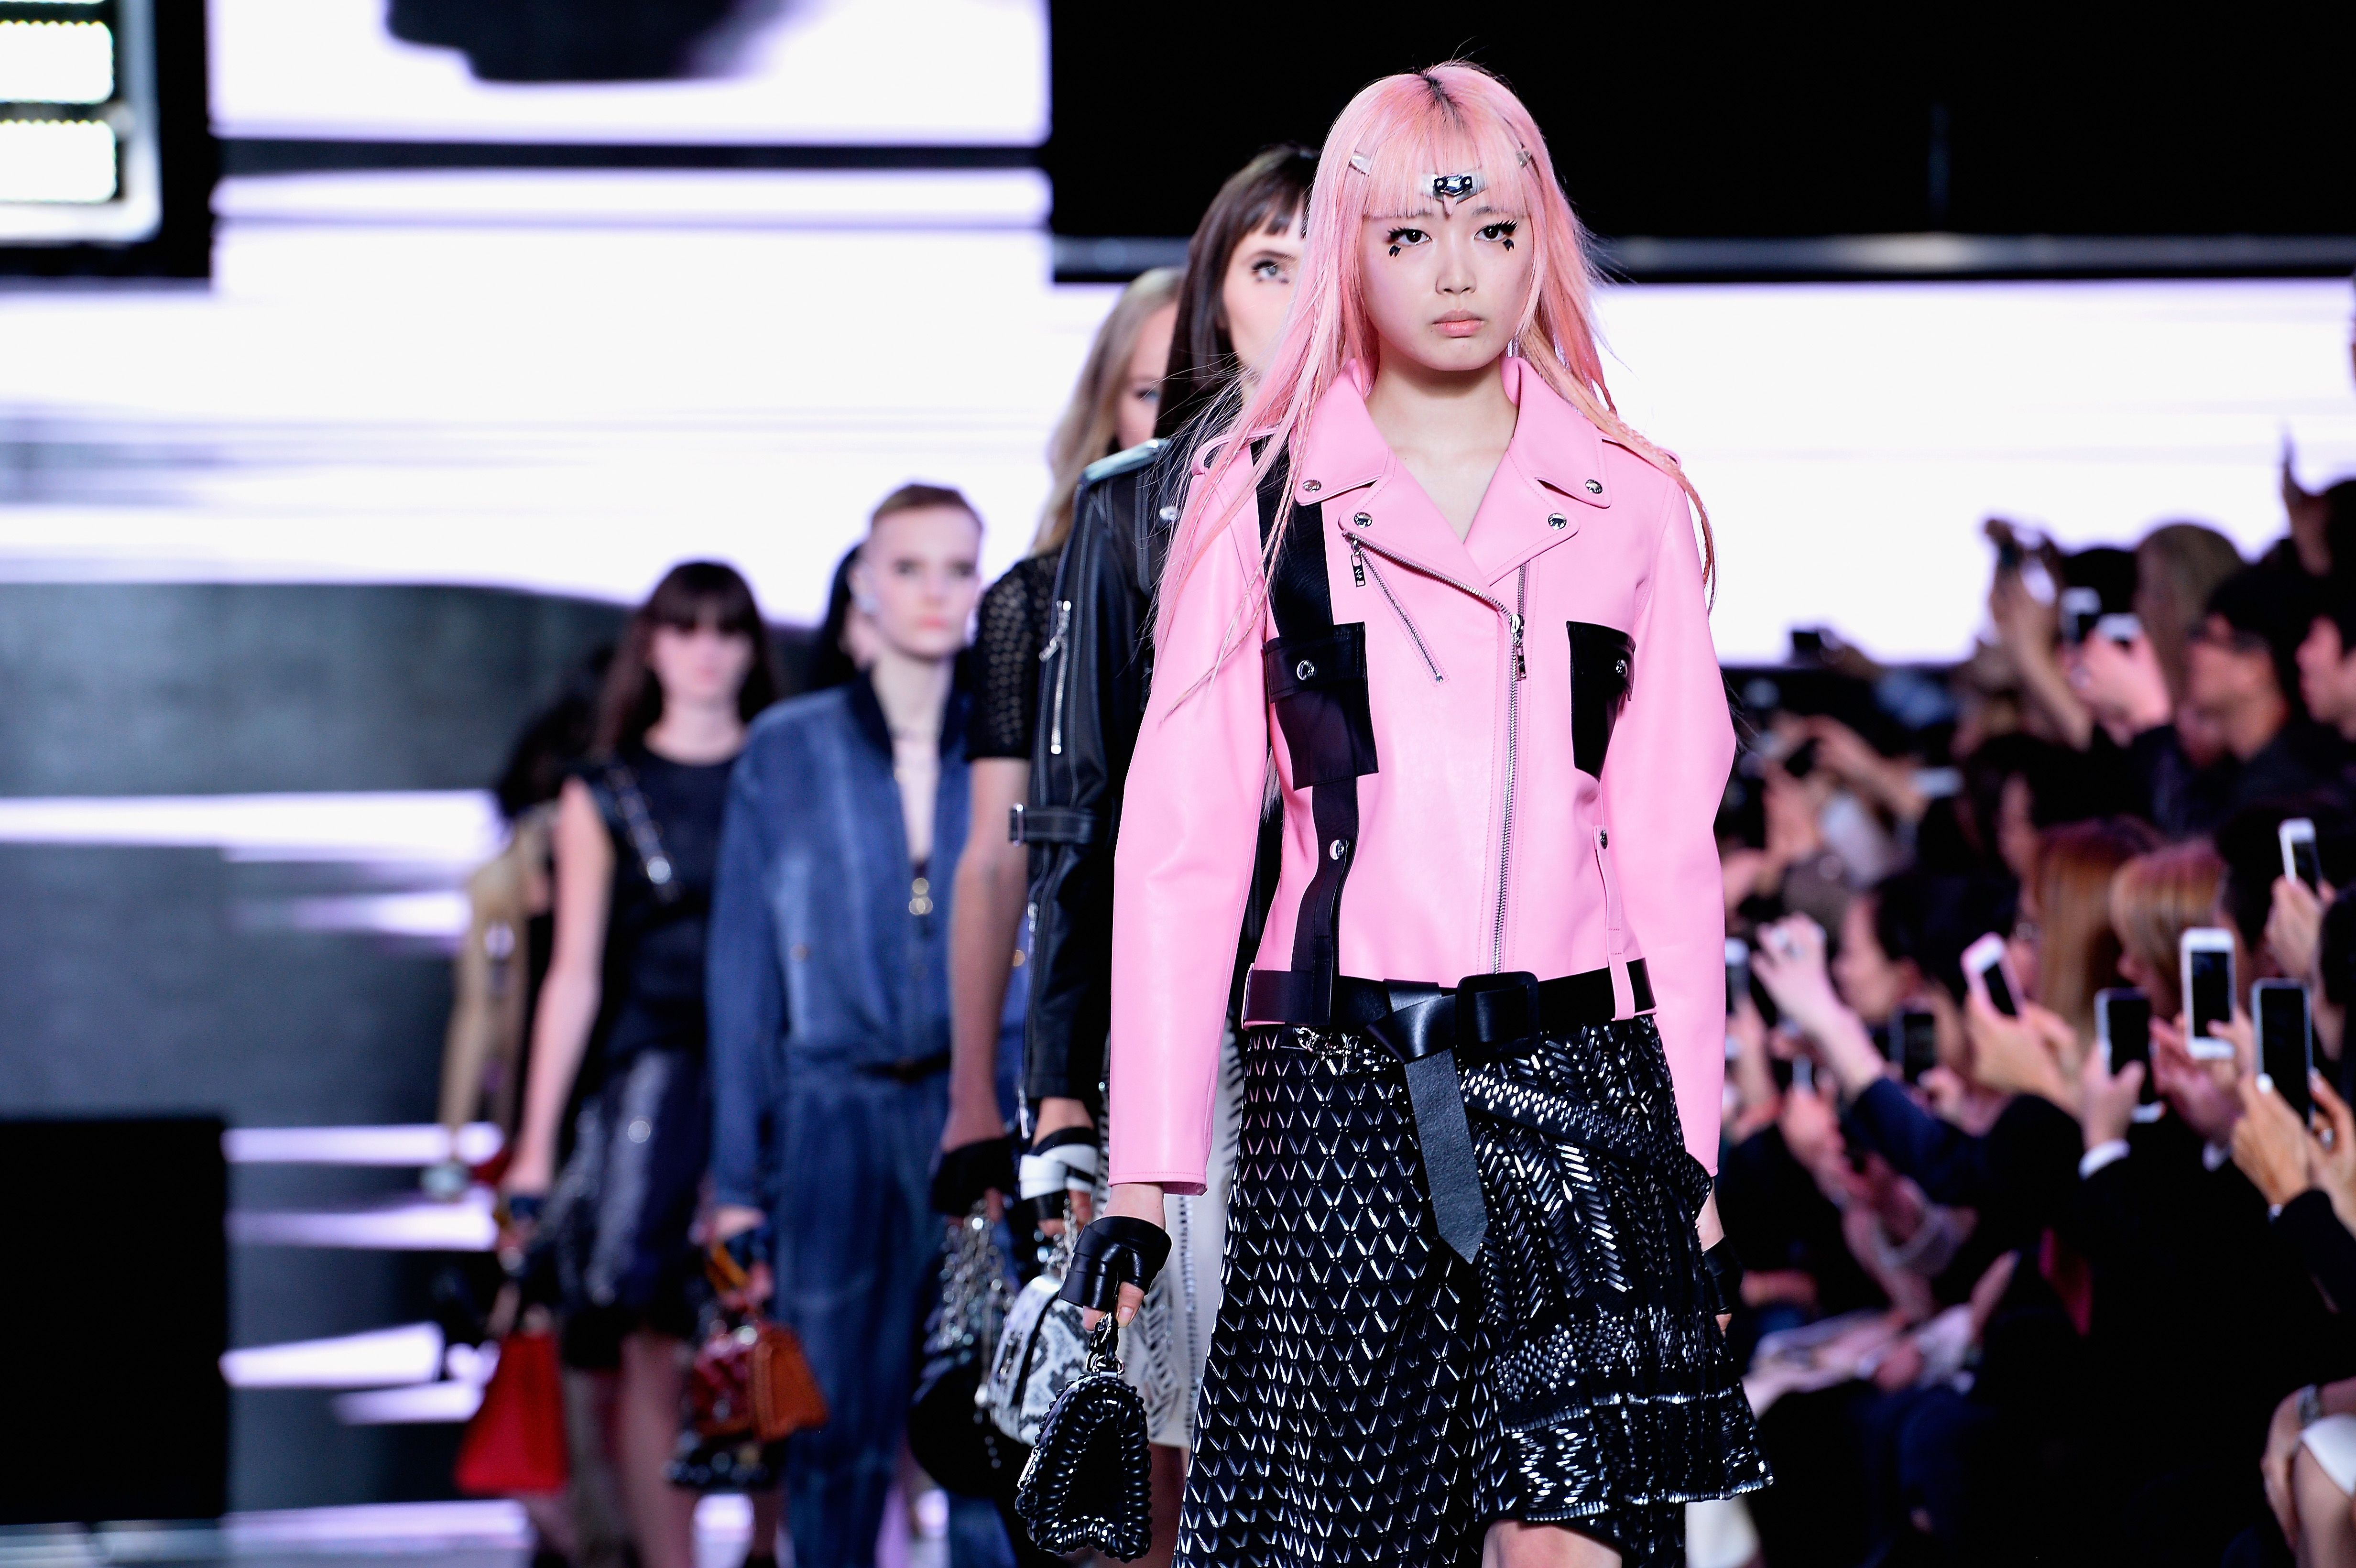 Final Fantasy Characters Are Now Models for Louis Vuitton, Which